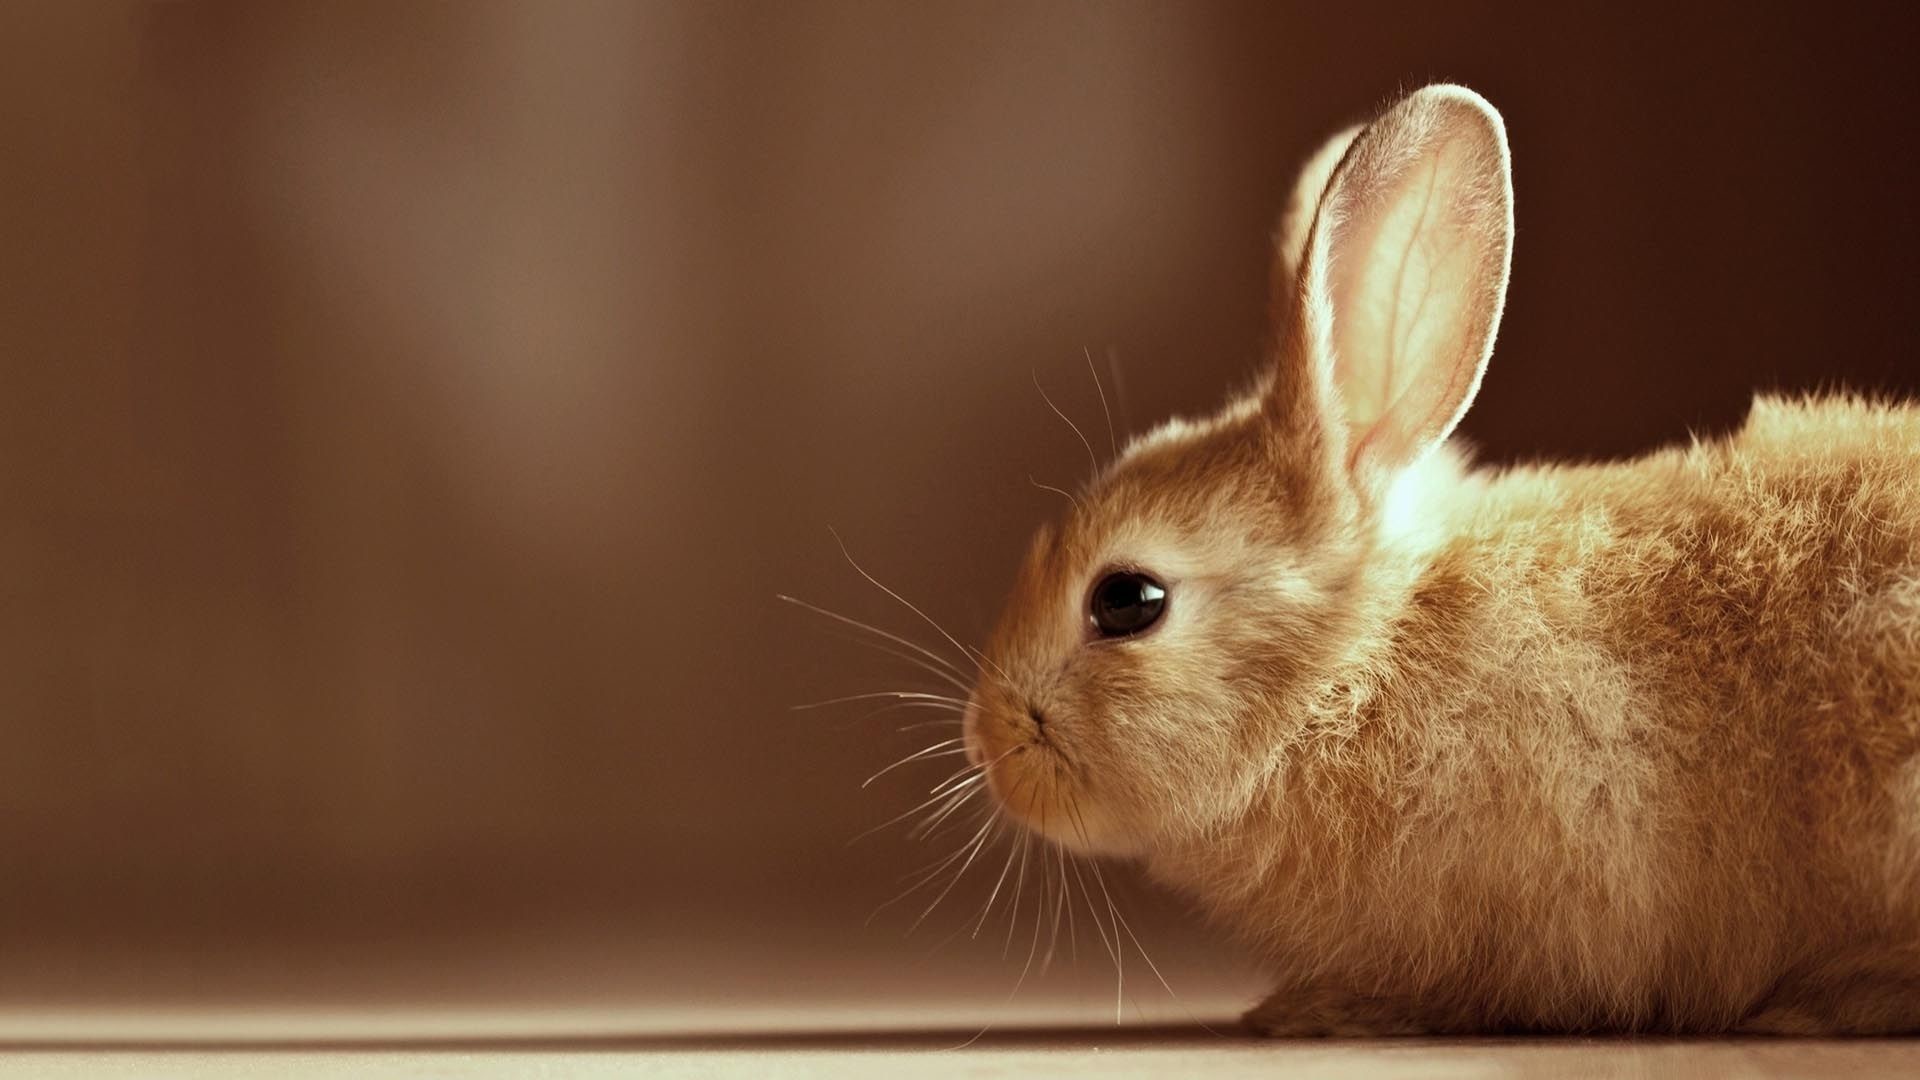 1920x1080 Bunny Wallpapers Find best latest Bunny Wallpapers For your PC desktop  background & mobile phones